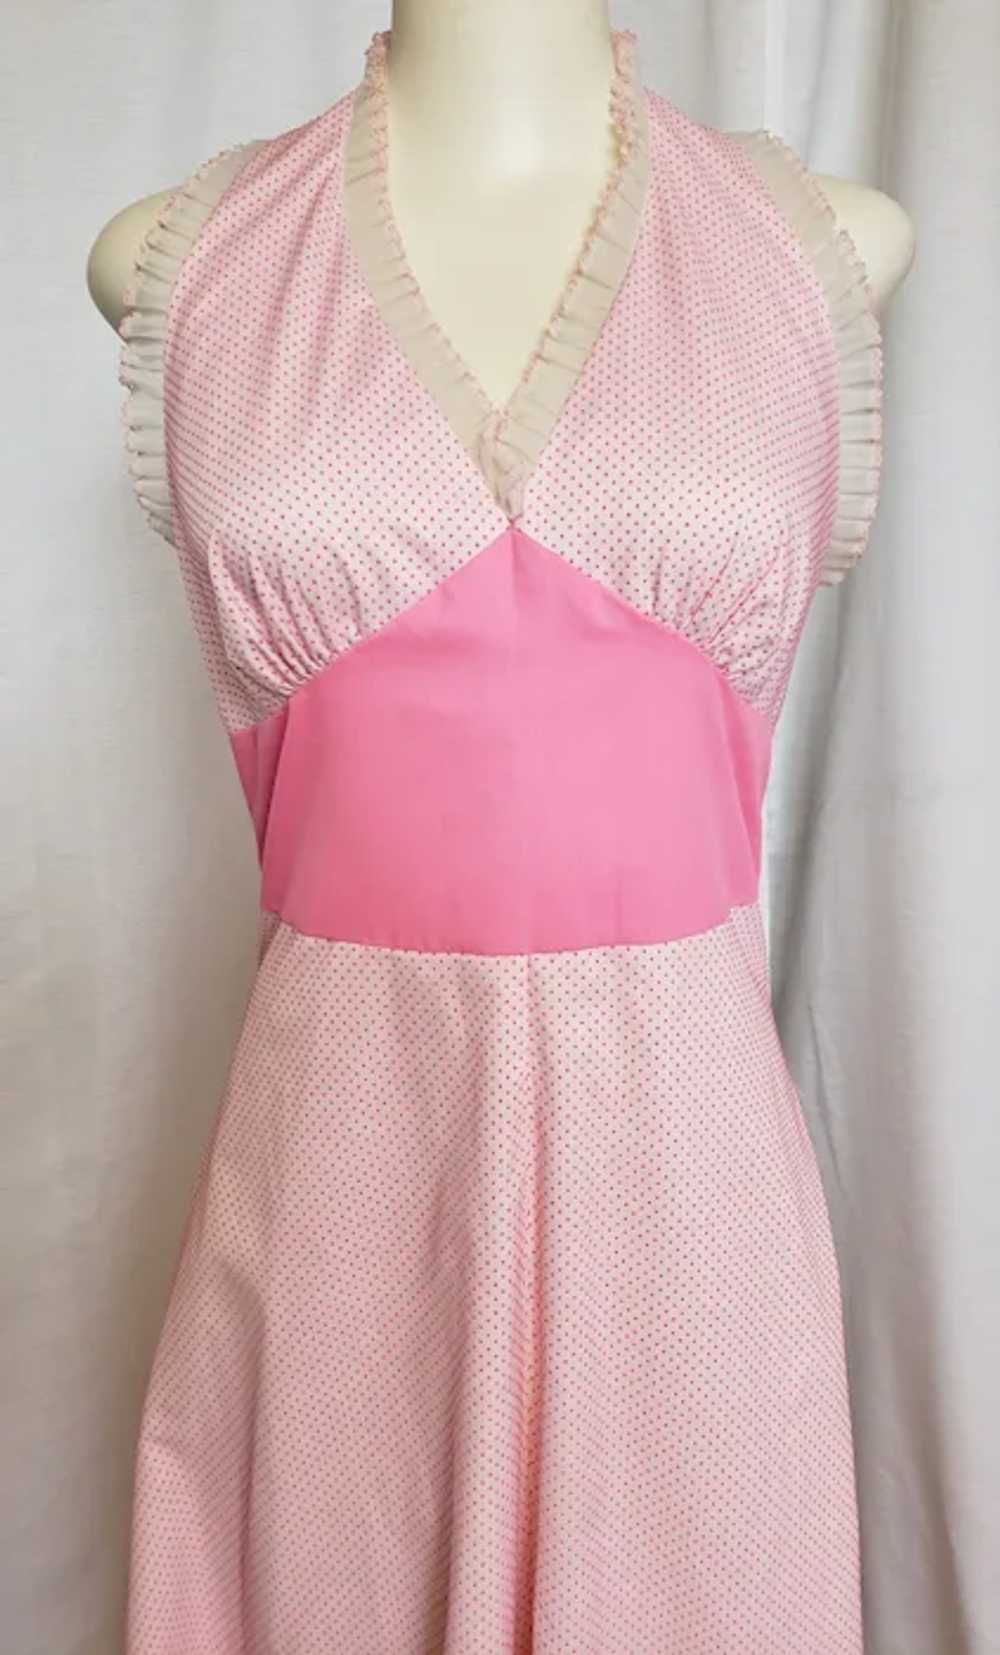 Pretty in Pink, Dotted Swiss Halter Dress - image 11